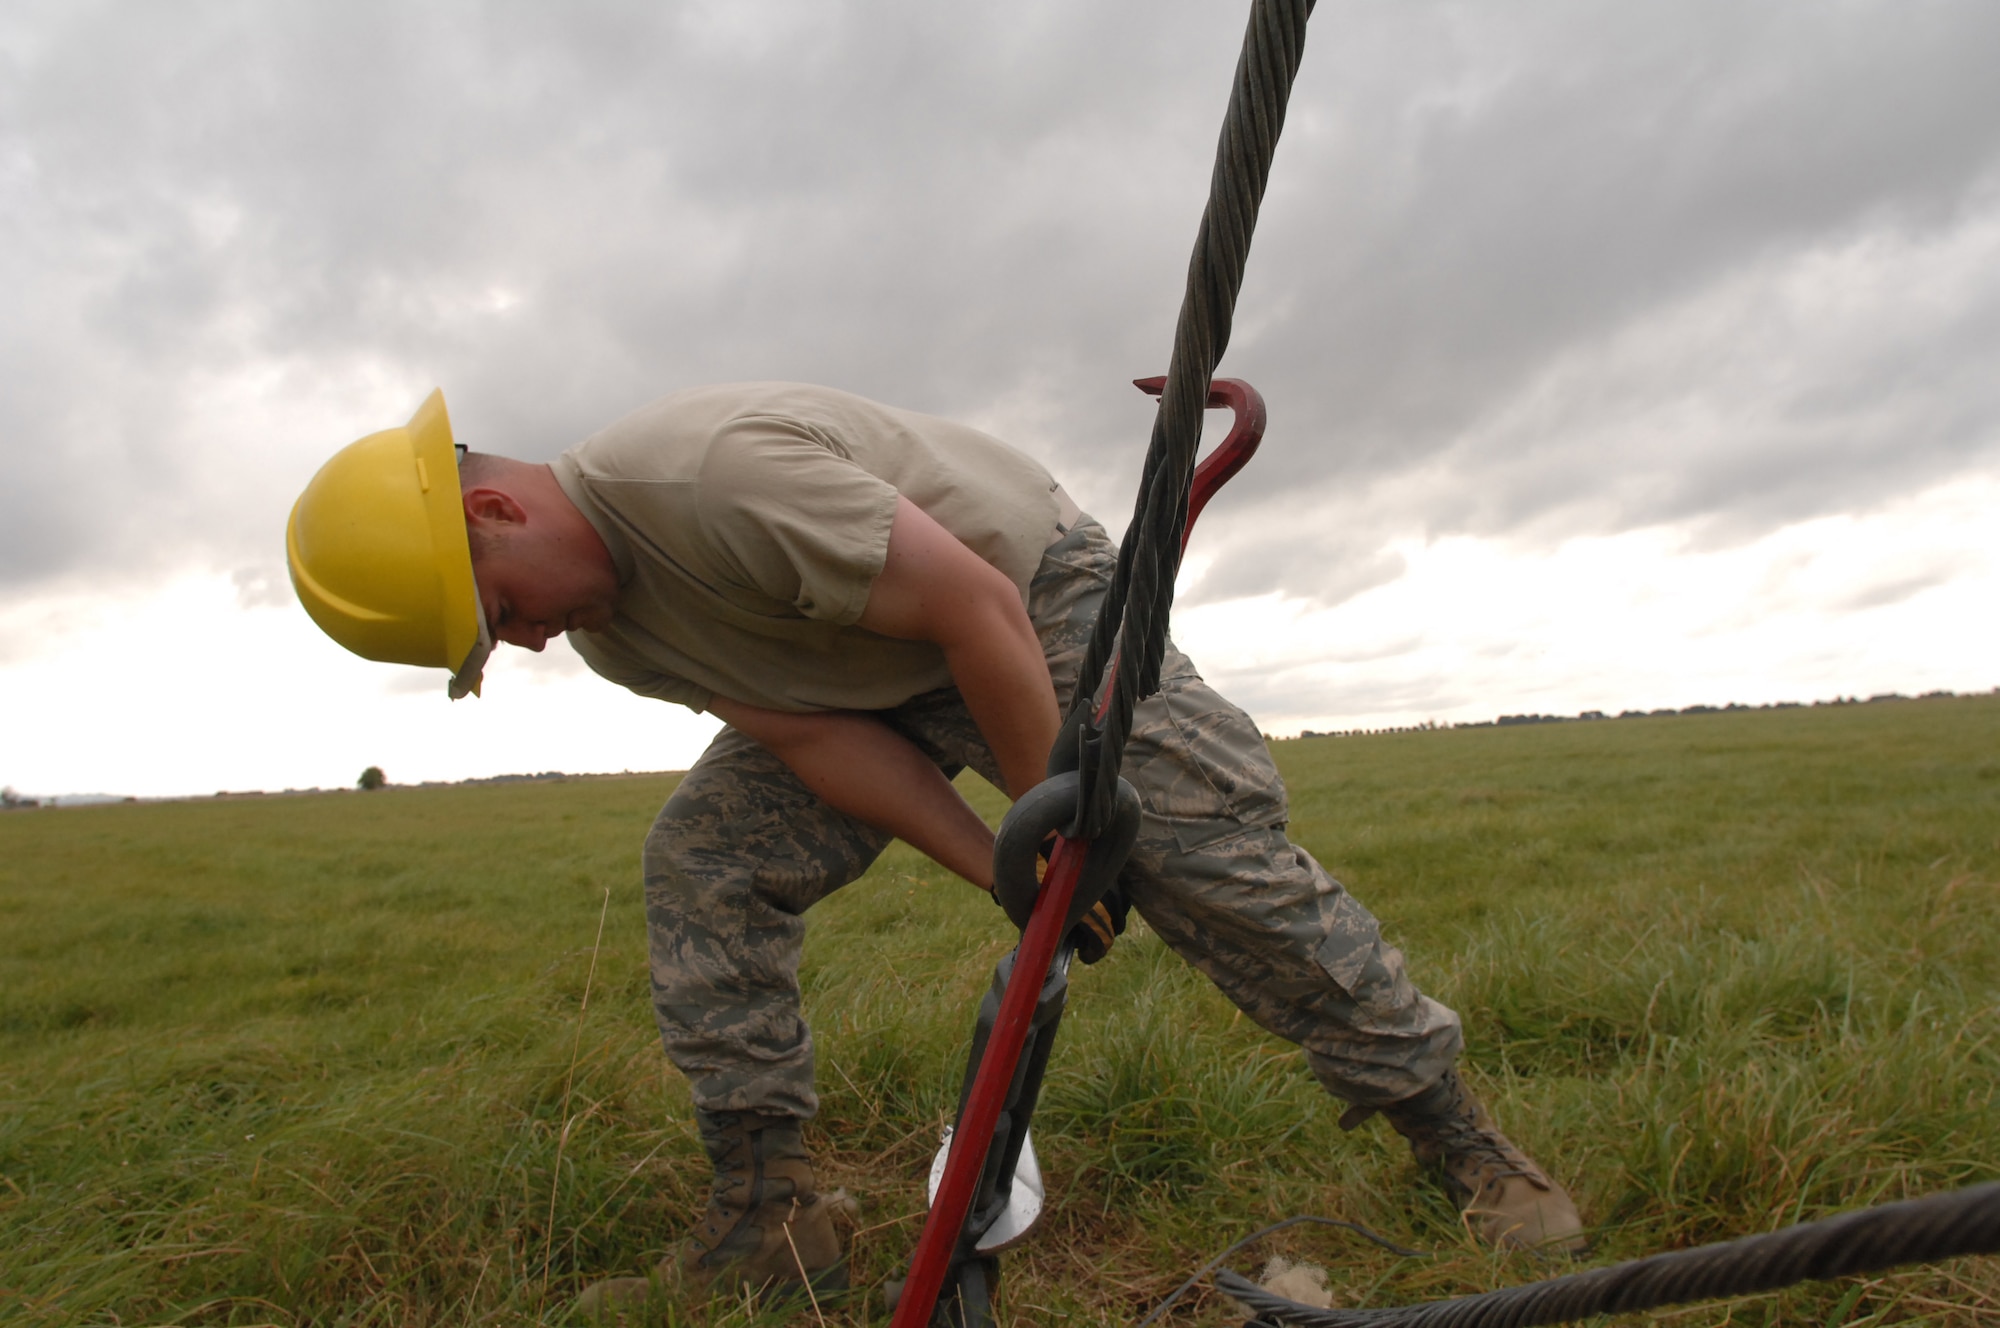 U.S. Air Force Staff Sgt. Scot Craig, 1st Communications Maintenance Squadron, loosens a guywire, which holds tension through tie-down points connected to a radio tower. Sergeant Craig is a member of the Cable and Antenna Theater Maintenance Team, who travel routinely throughout Europe maintaining the communications capability force across the Atlantic and on into the European Route. (U.S. Air Force photo by Tech. Sgt. Michael Voss)